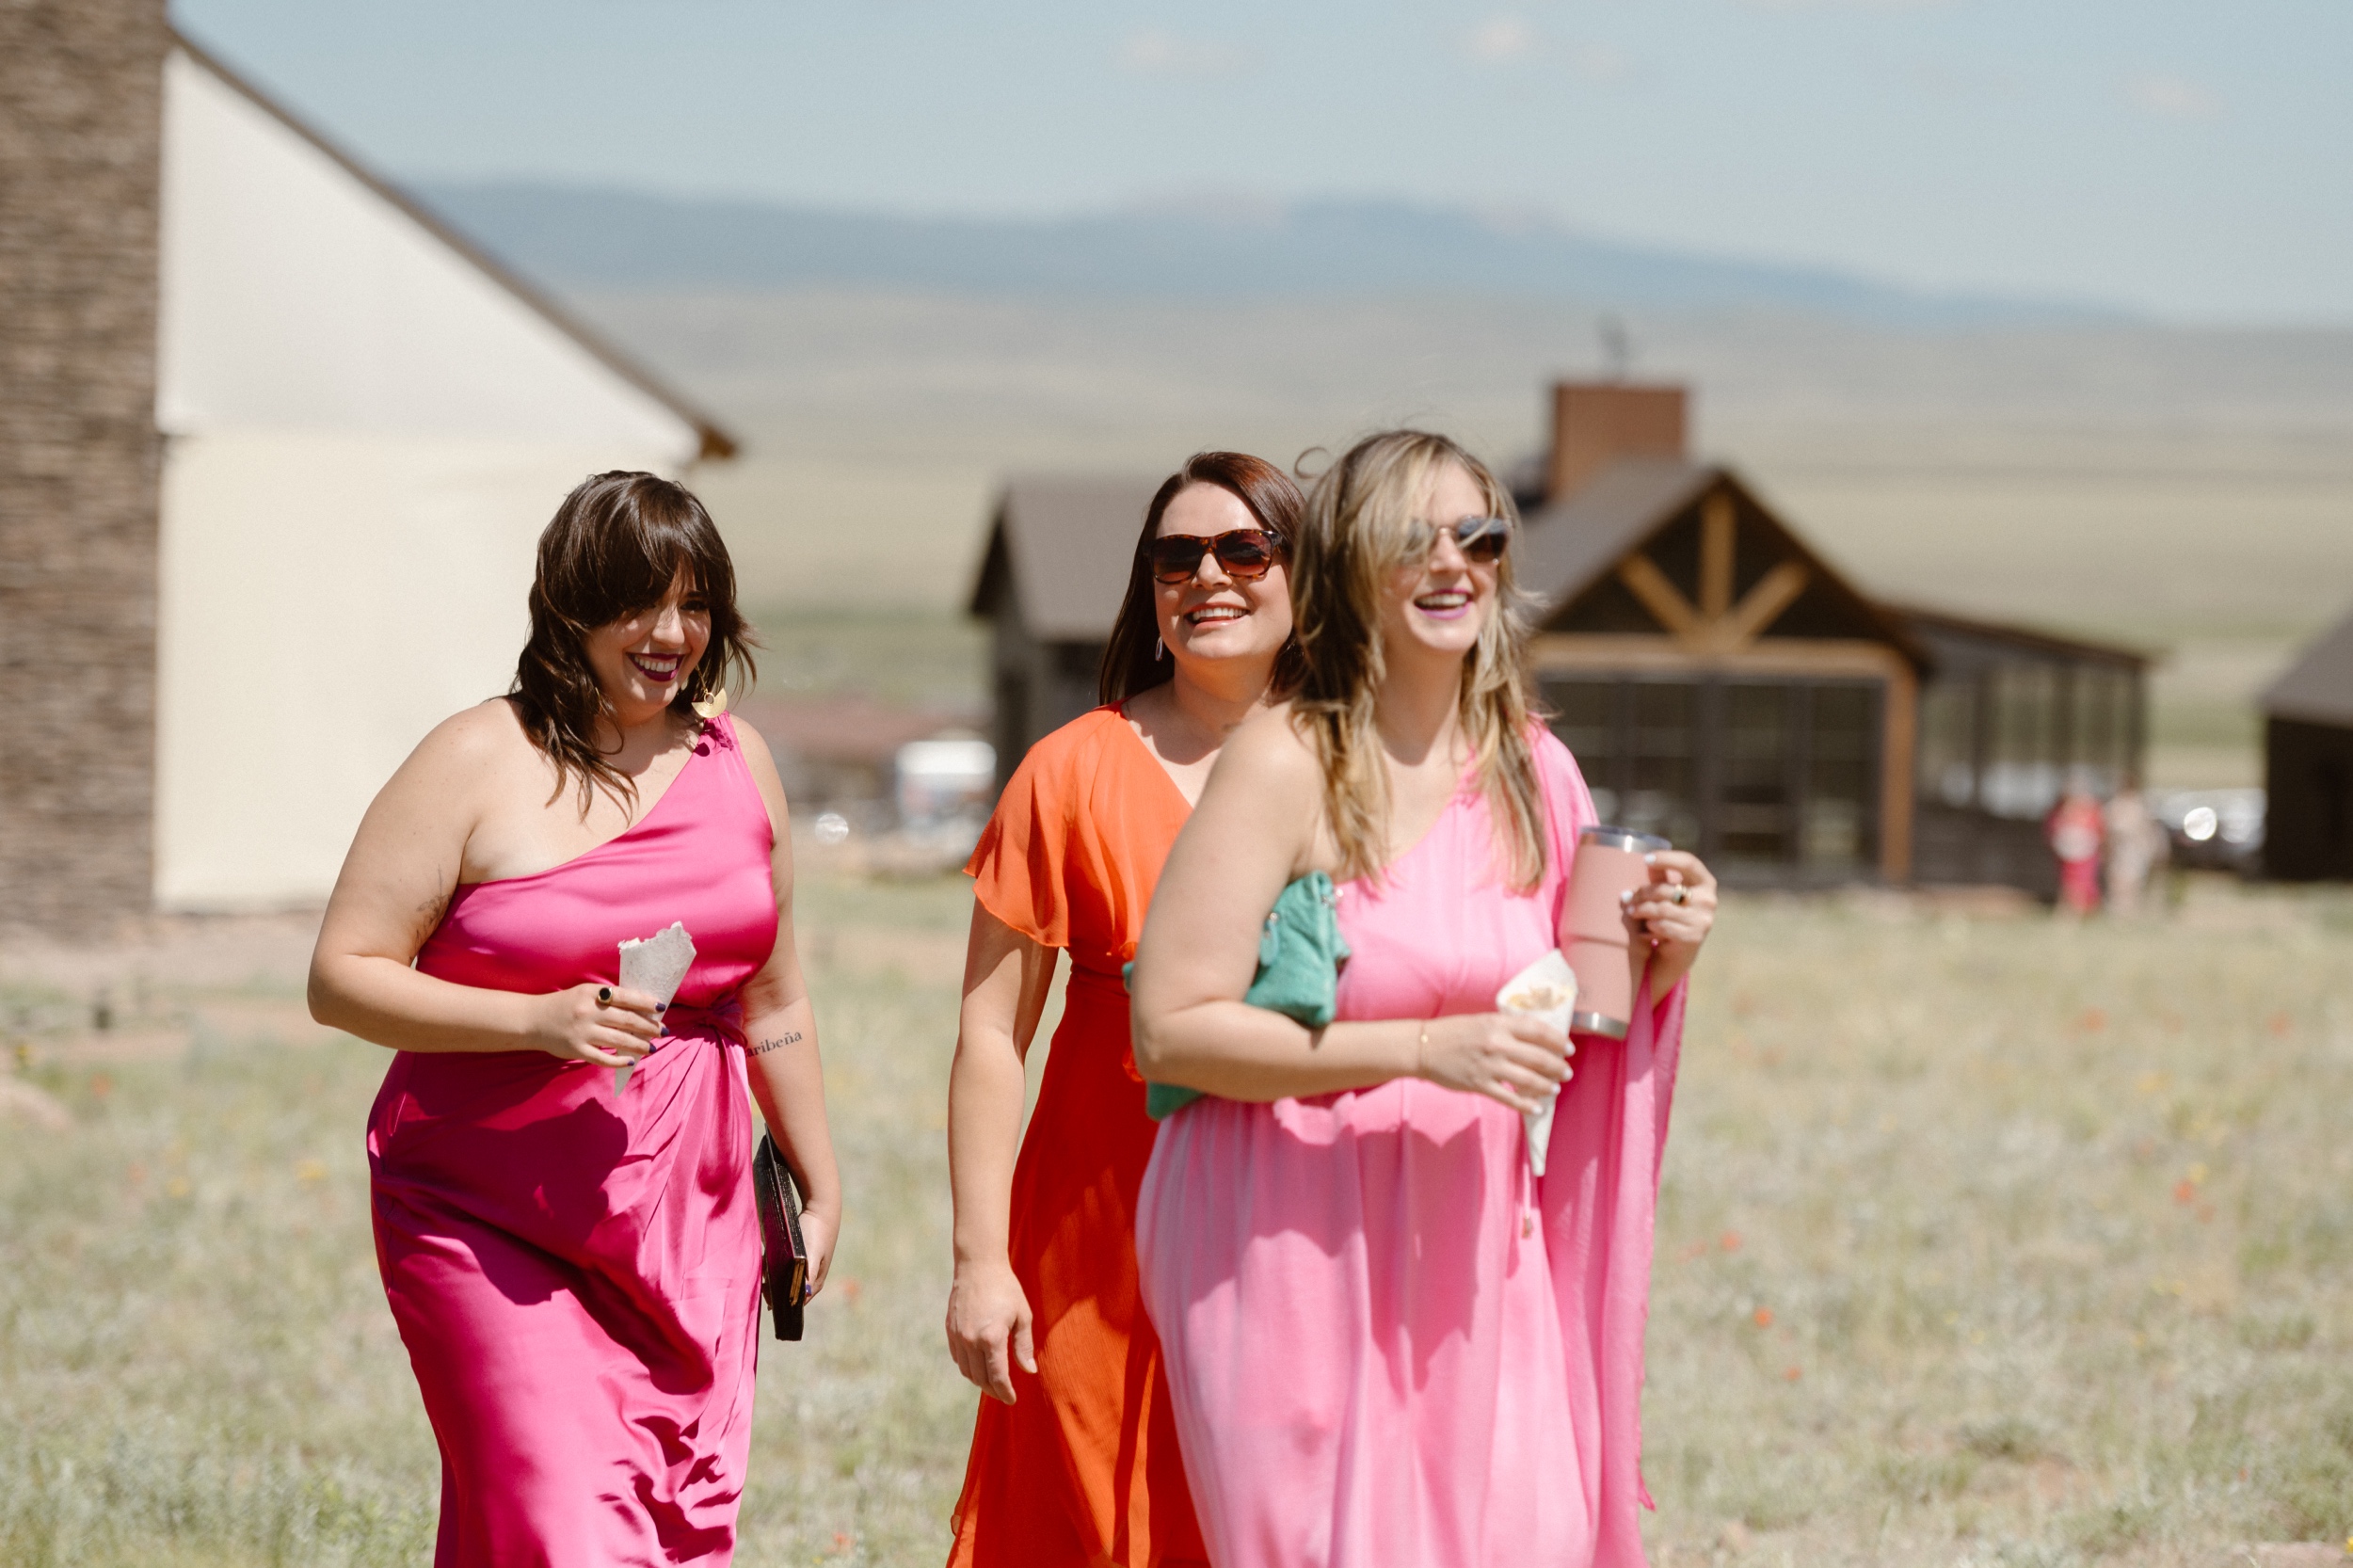 Wedding guests walking along a wooden path to find their seats for the wedding ceremony at Three Peaks Ranch. Photo by Colorado wedding photographer Ashley Joyce.